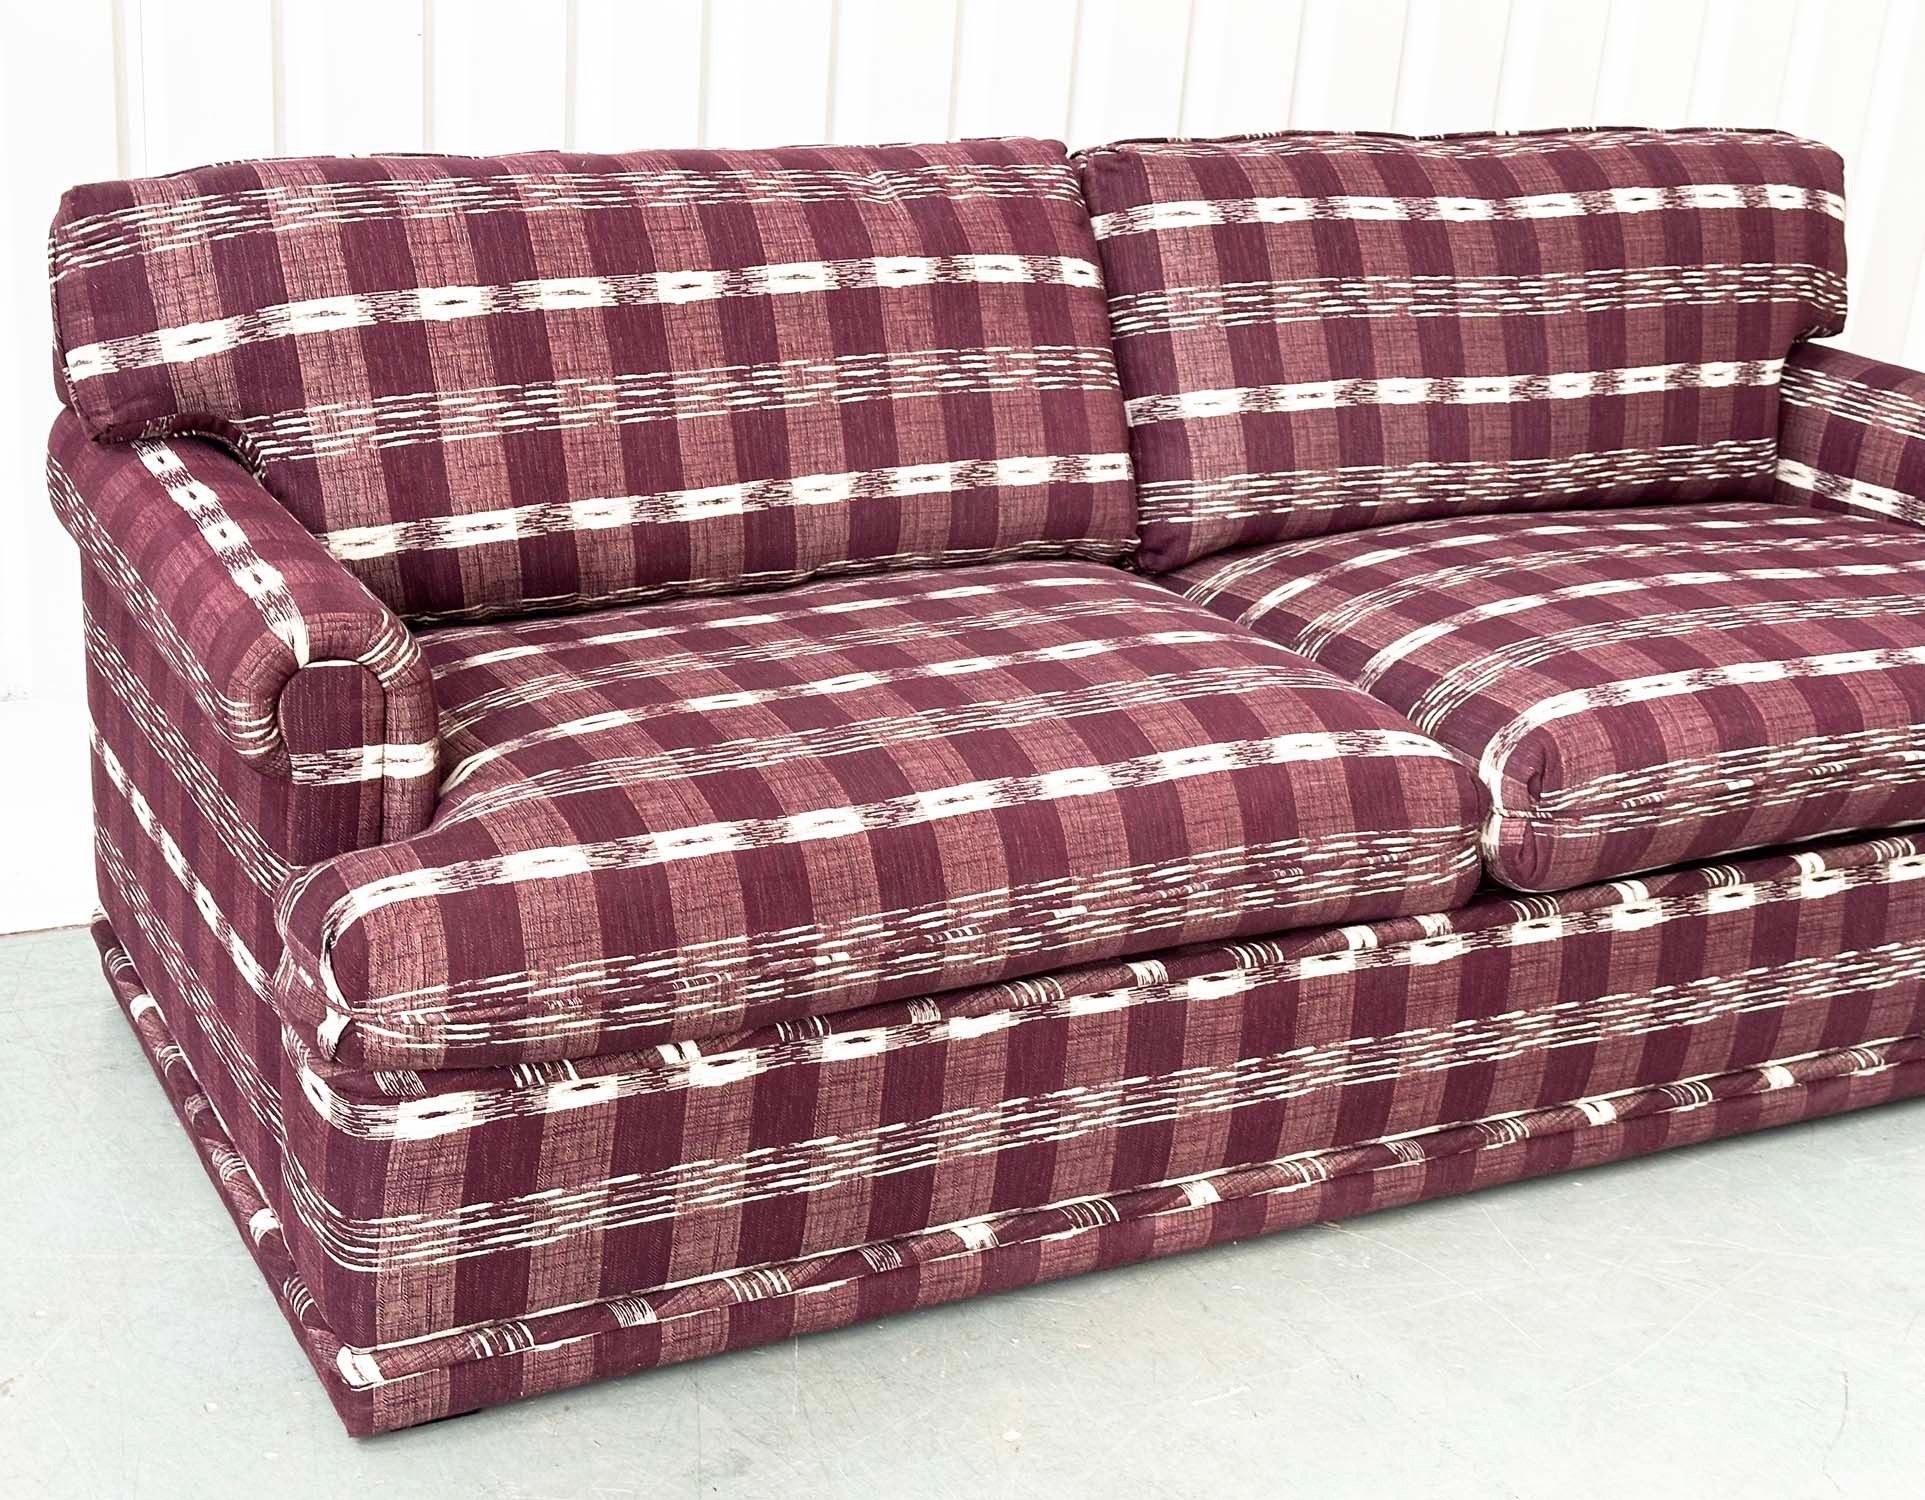 SOFA, Swedish check purple/white upholstery with scroll arms, 203cm W. - Image 6 of 9